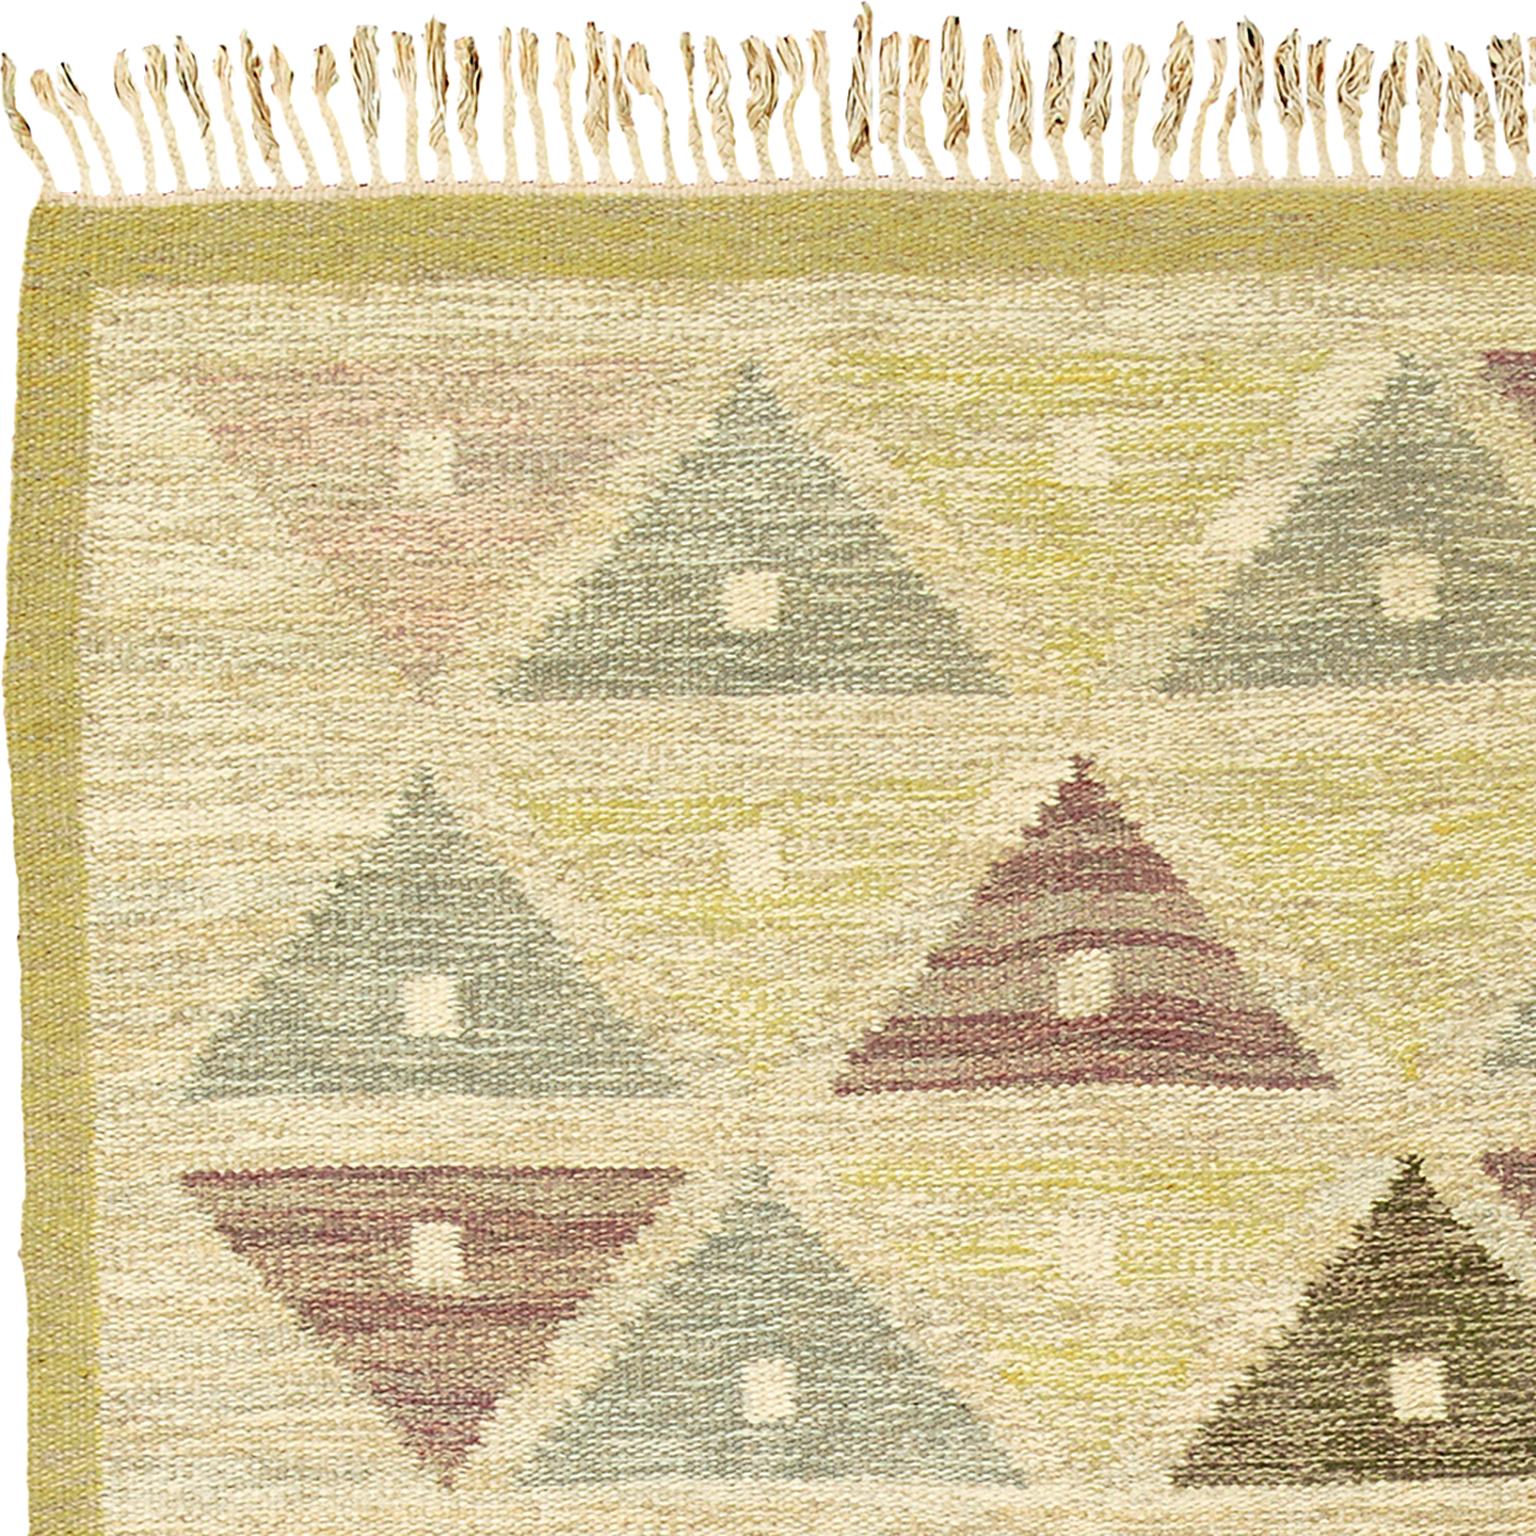 Swedish Flat-Weave Rug by Sigvard Bernadotte In Excellent Condition For Sale In New York, NY